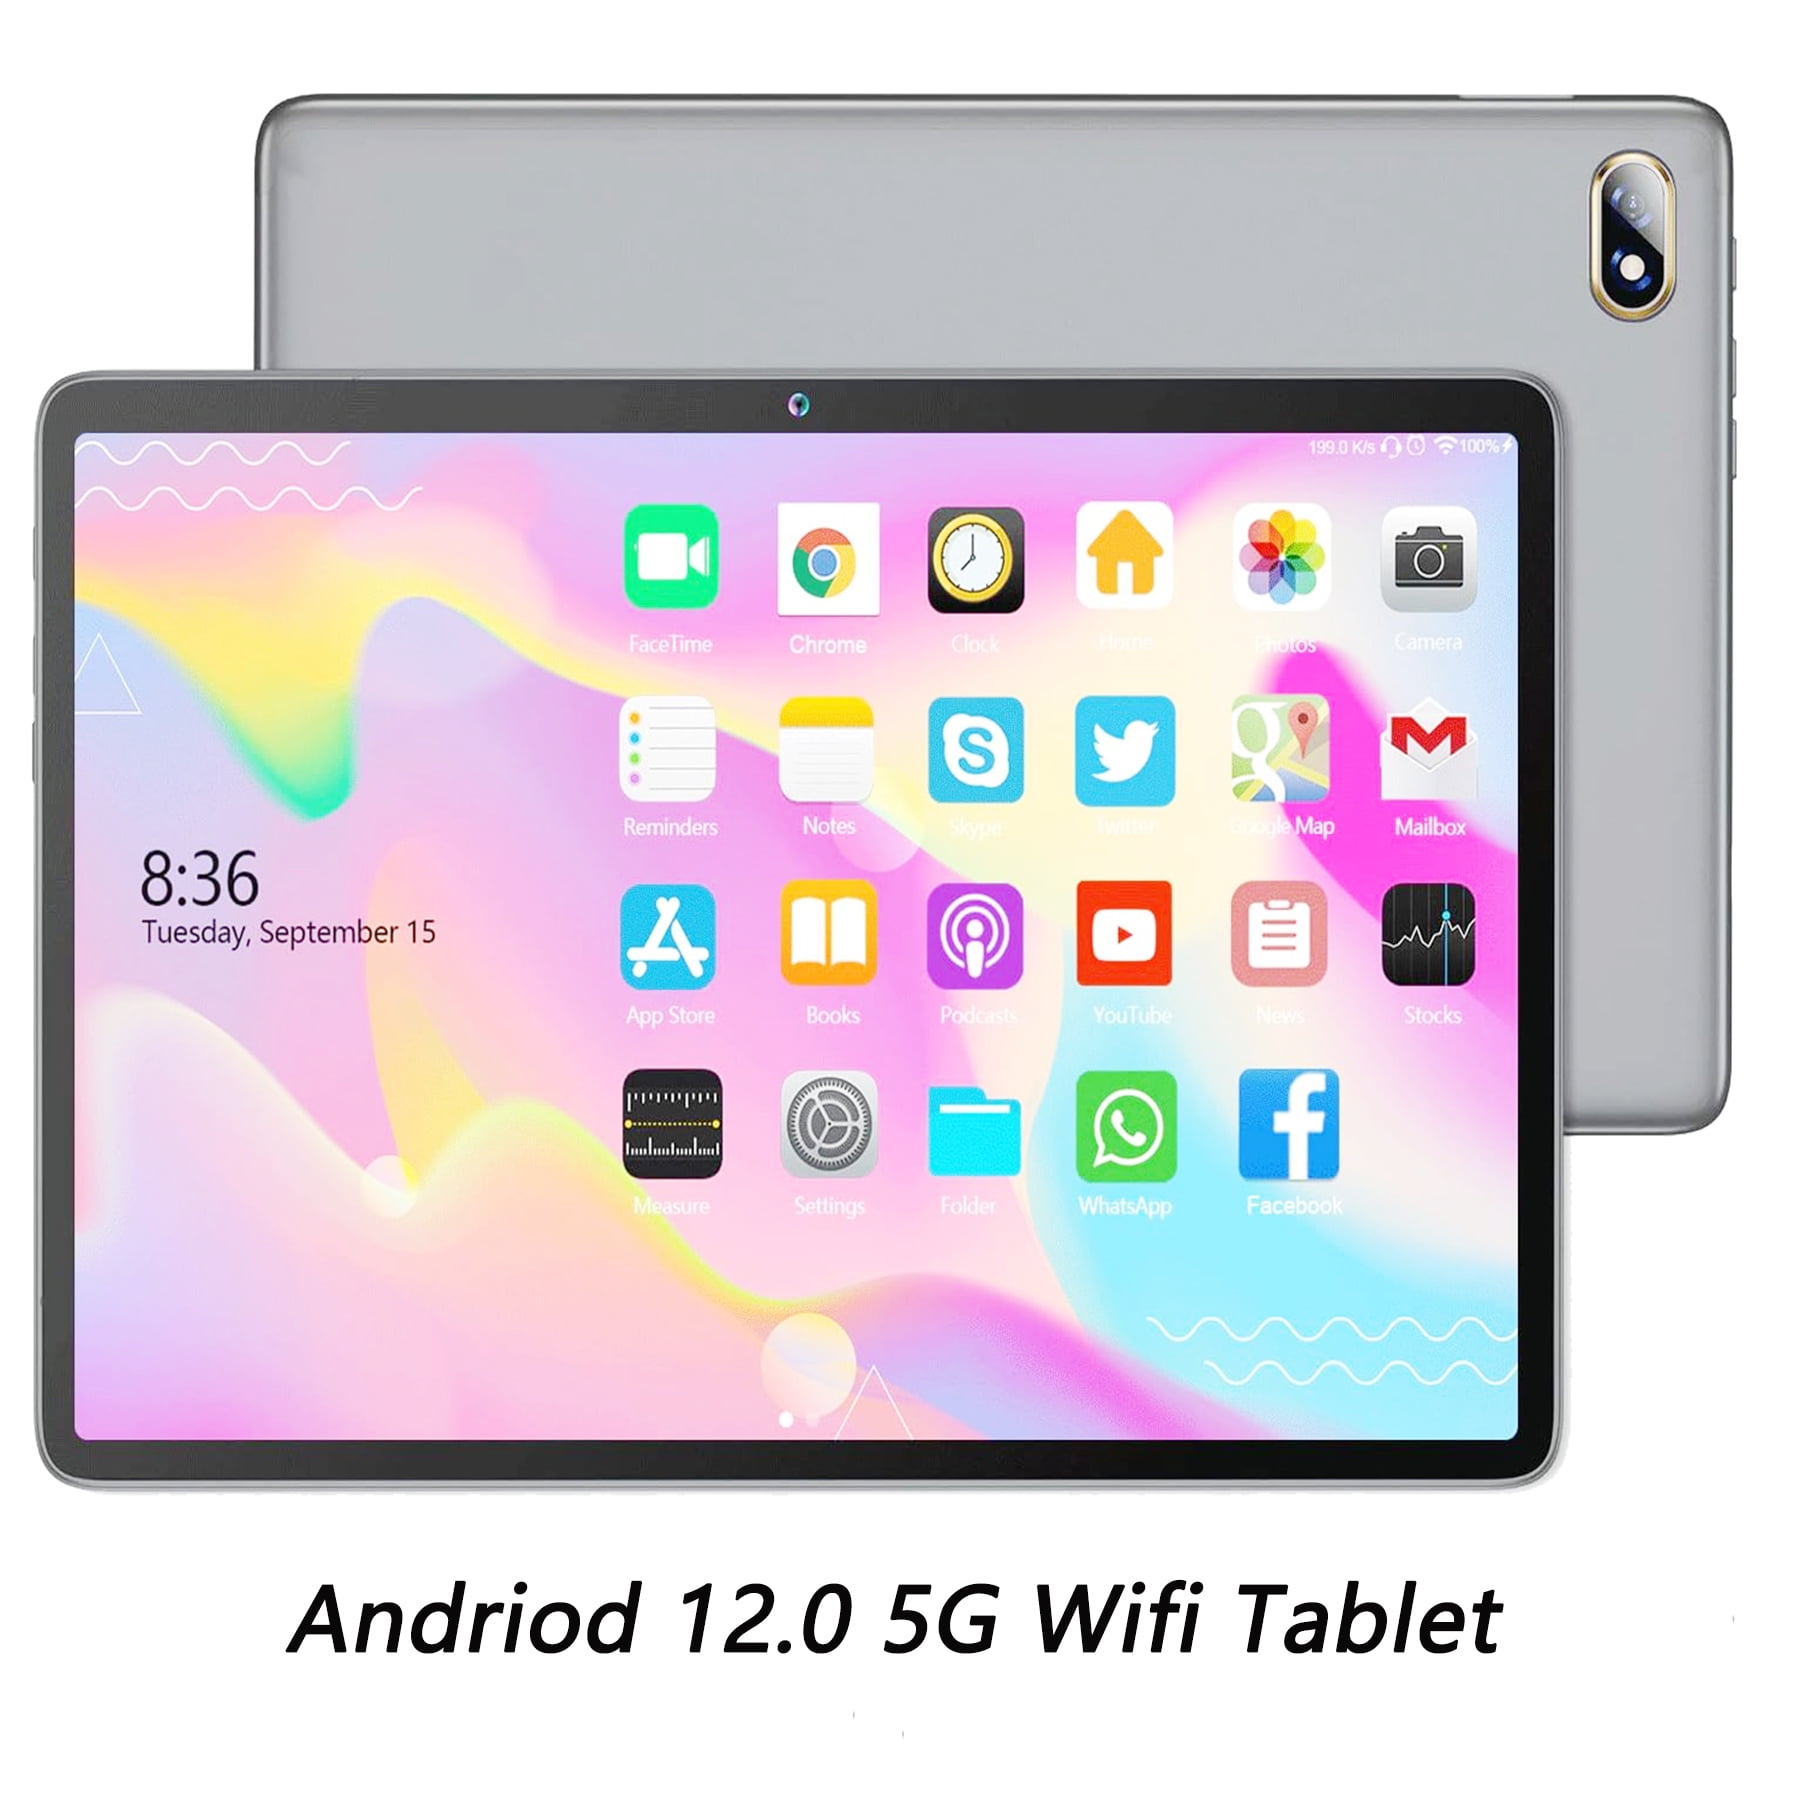 Tablets 10.1 inch Android 12 Tablet 5G Wifi Tablet Octa-Core Arm 4GB Ram  128GB Rom 1TB Expand Wifi Gps Bluetooth